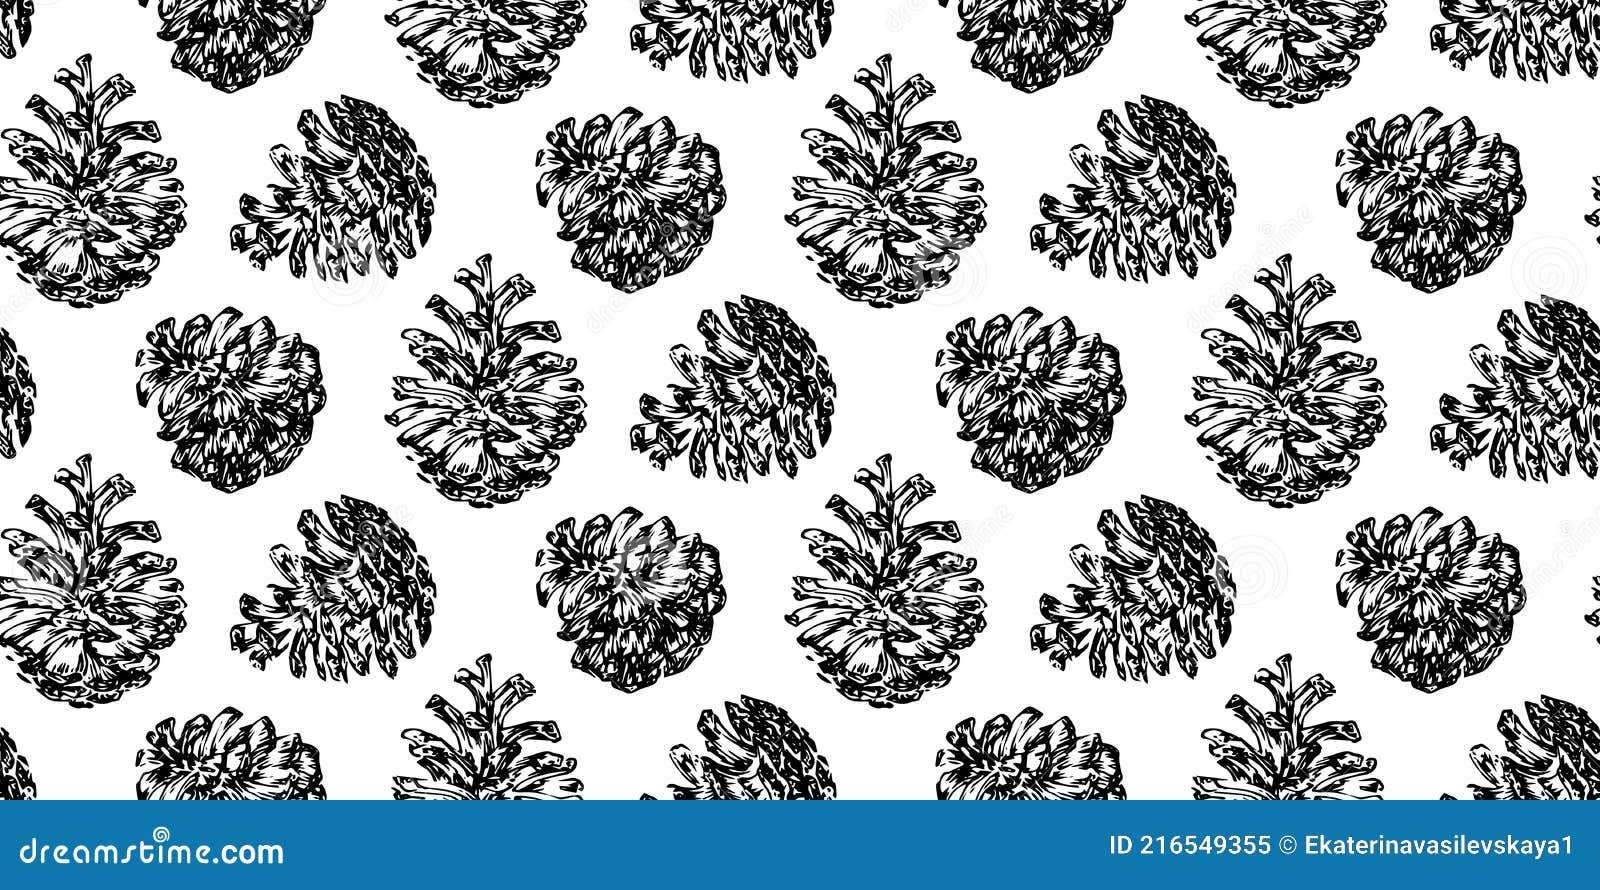 hand drawn pinecone  seamless pattern. linocut forest pine or fir cone decorative graphic background. stylized monochrome